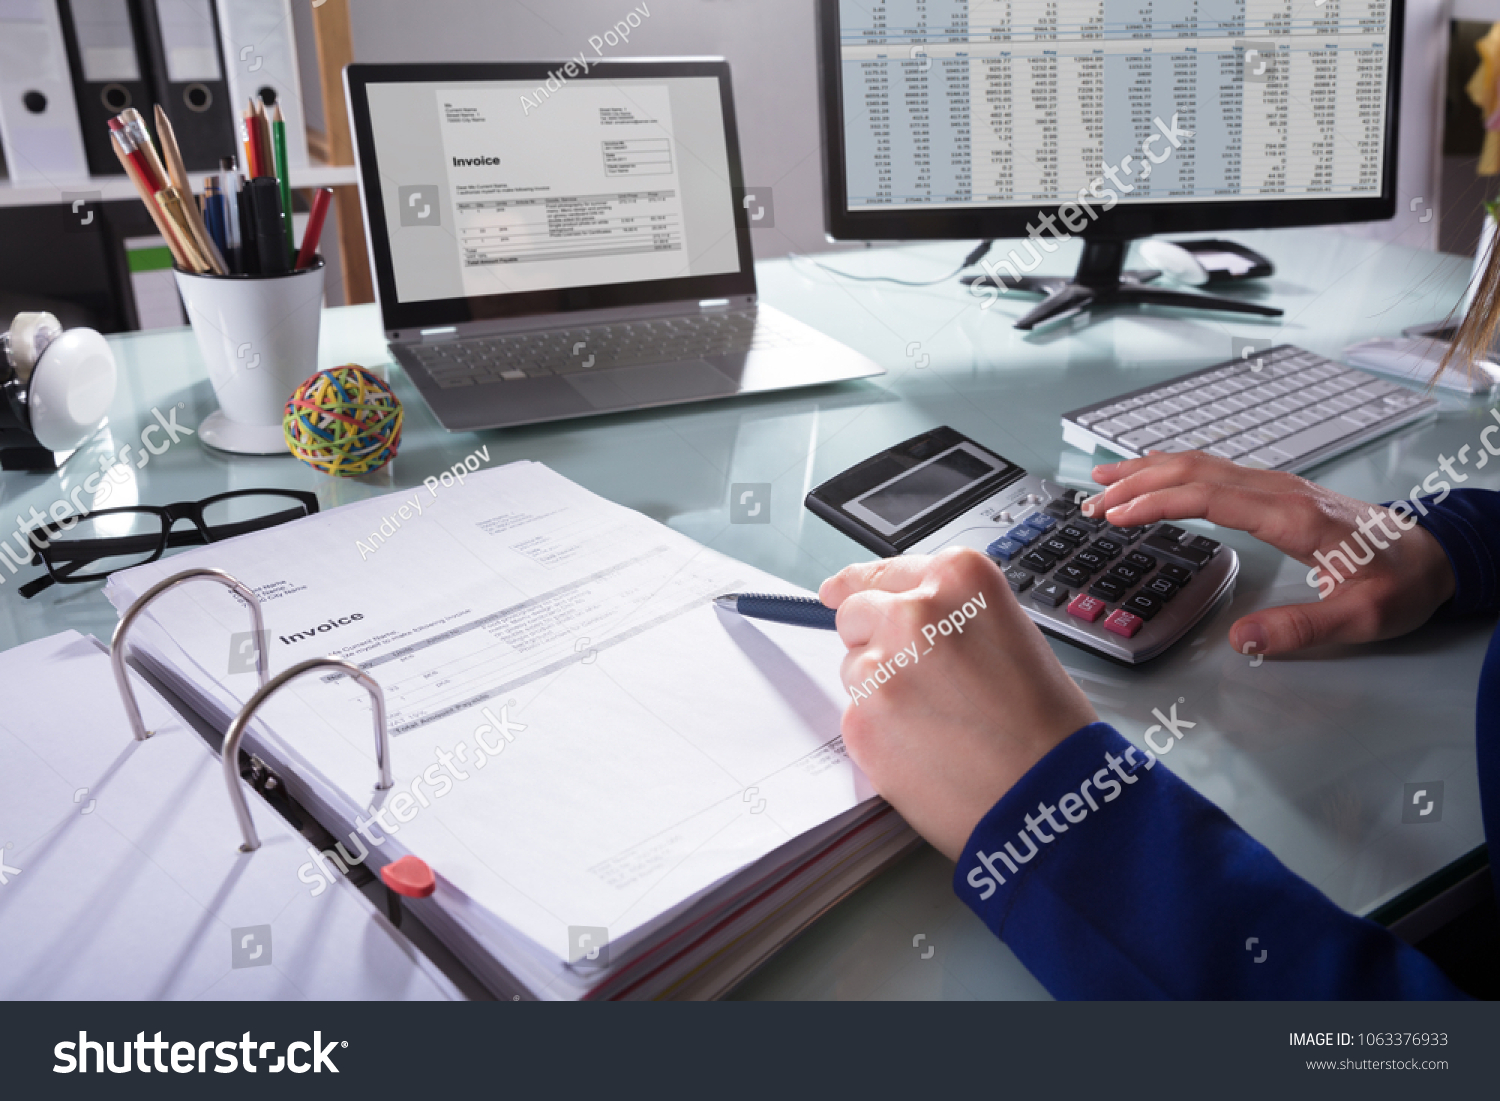 Close-up Of A Businessperson's Hand Calculating Invoice At Workplace #1063376933